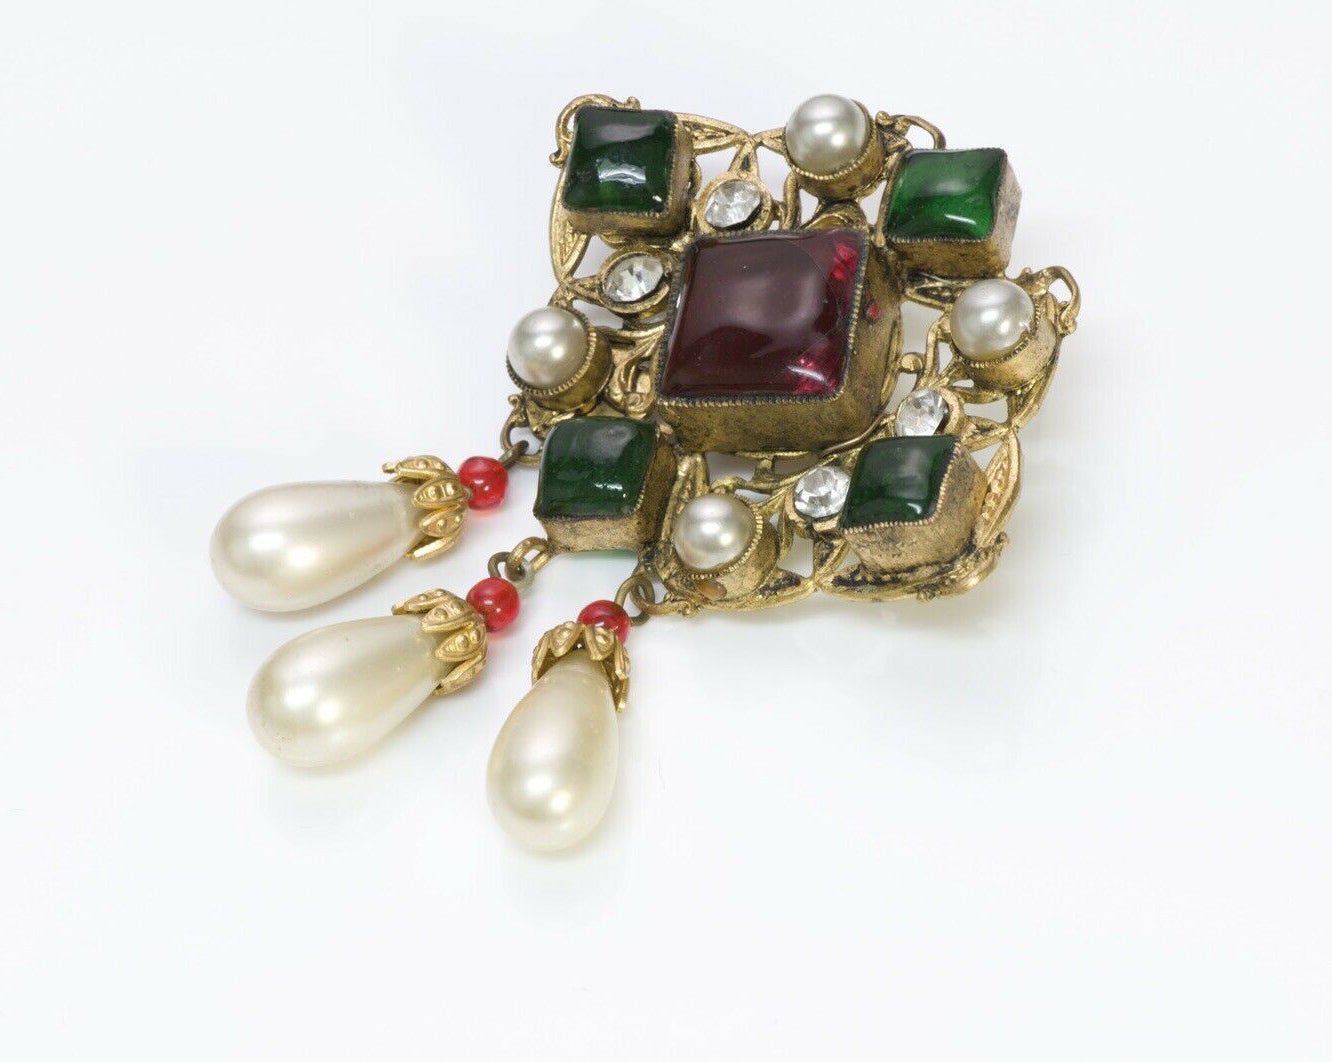 CHANEL Couture 1983 Maison Gripoix Byzantine Glass Pearl Brooch